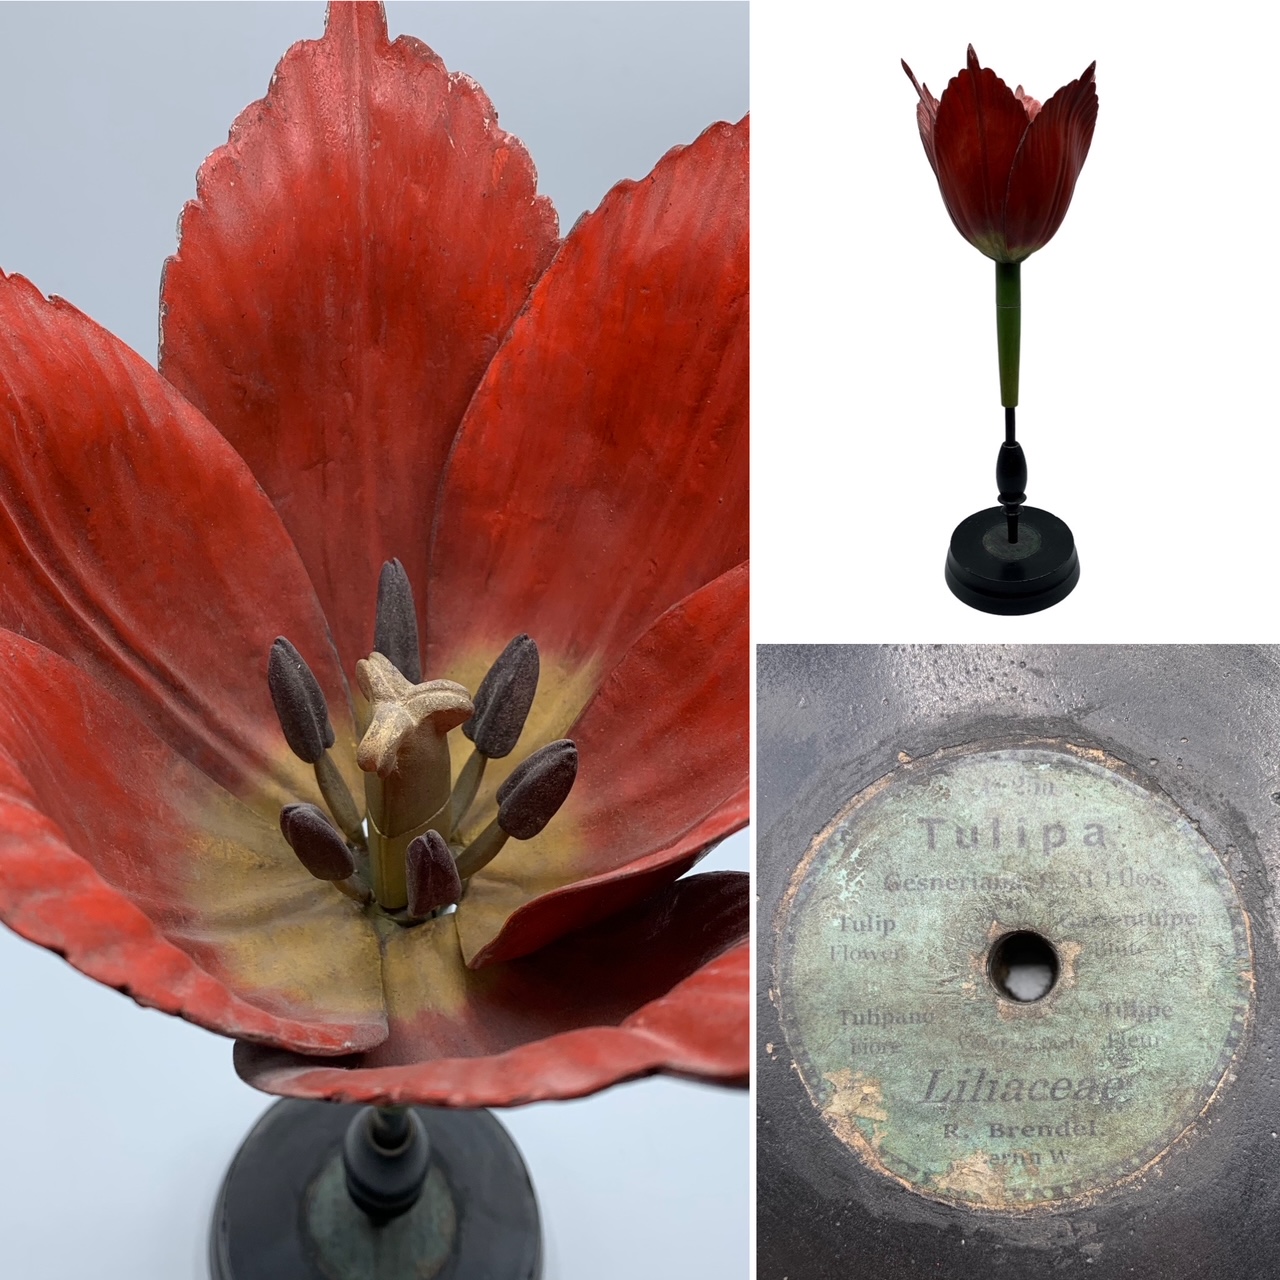 Antique botanical model of the Tulip, by R. Brendel, from the late 1800’s/early 1900’s.